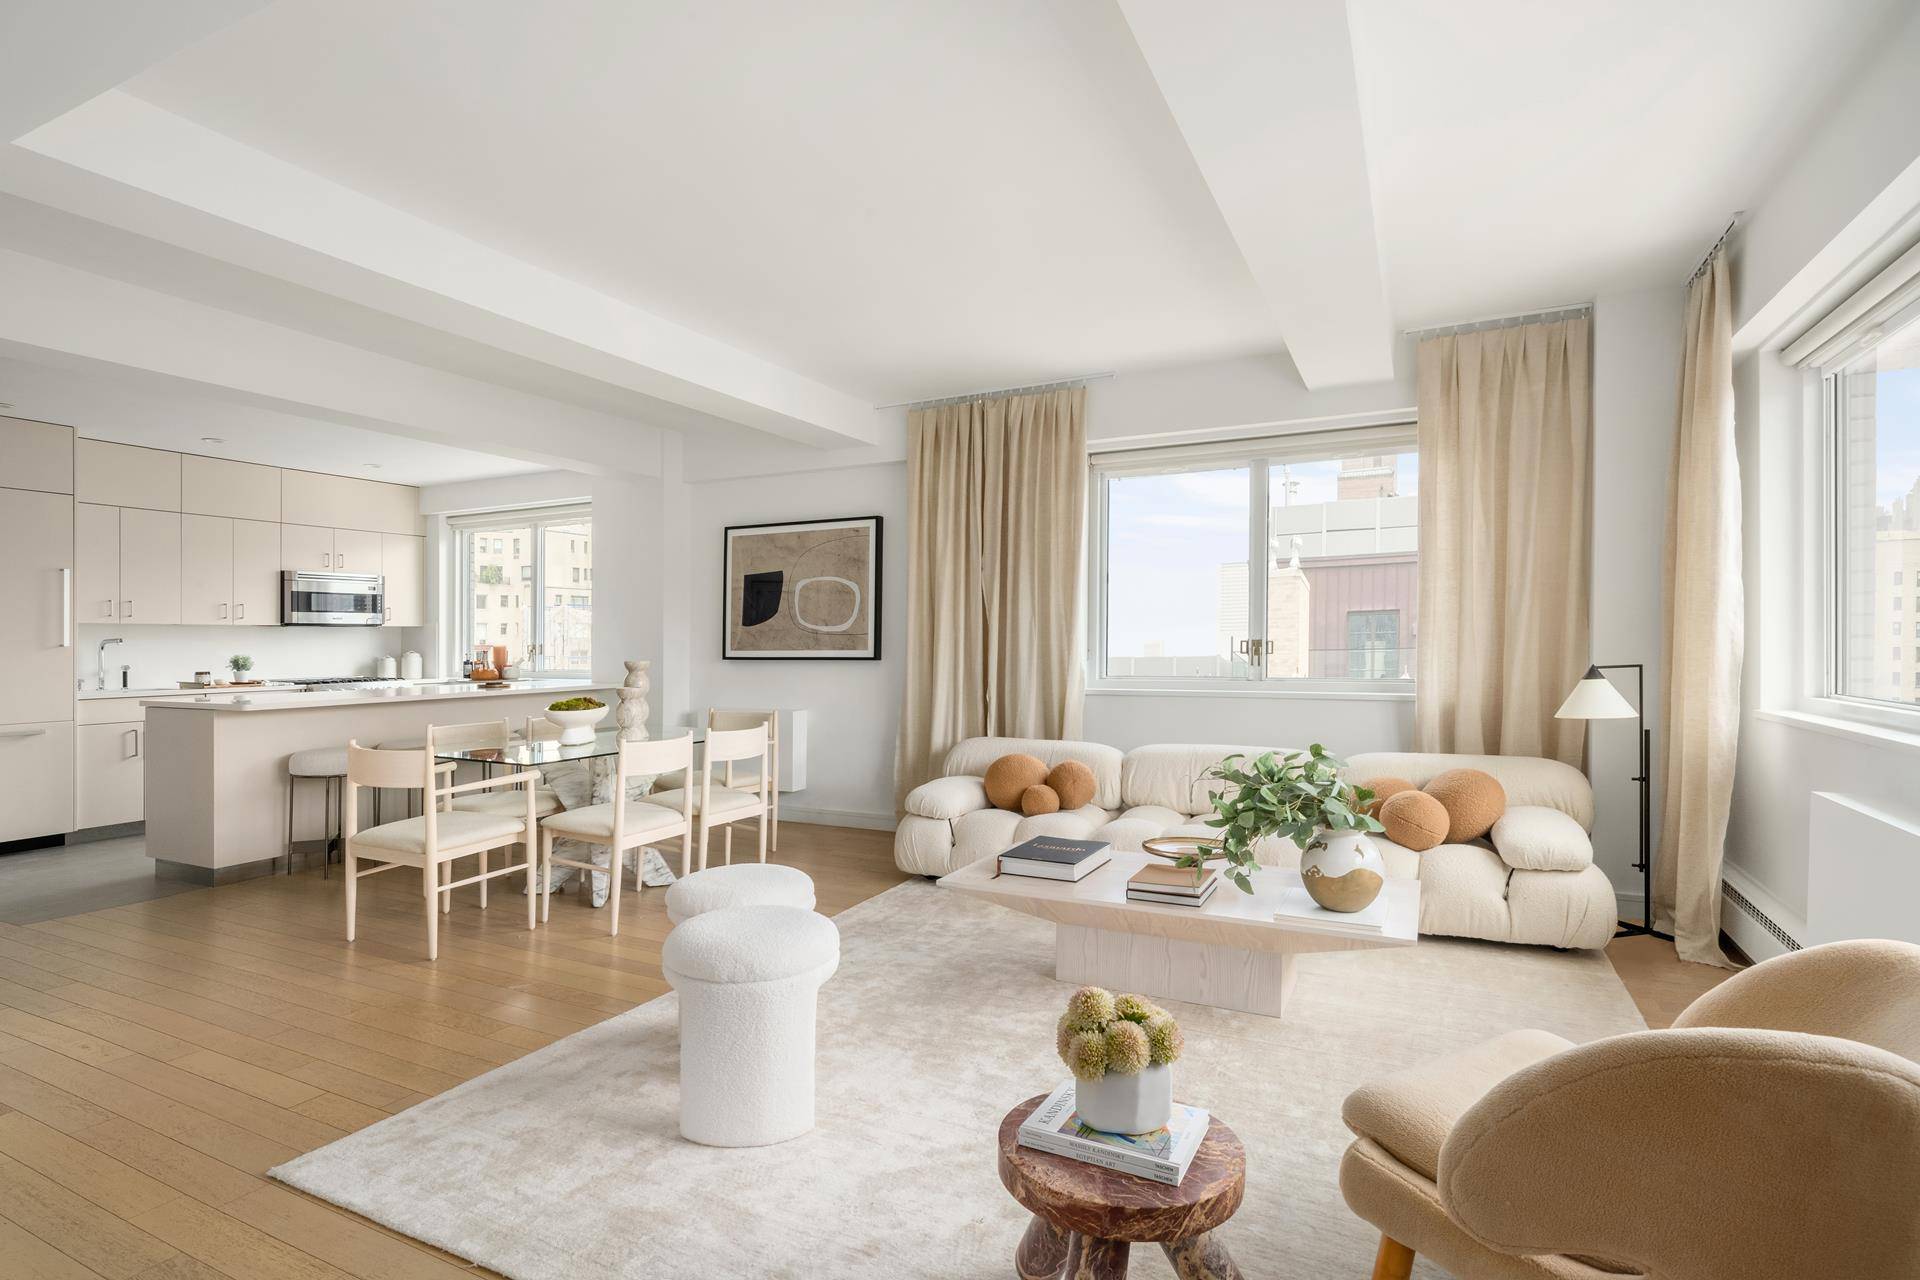 Wrapped in elegance and designed with a discerning eye, 16B at 20 East 68th Street is a finely renovated 3 bedroom 2 bathroom home in one of Manhattan's most coveted ...